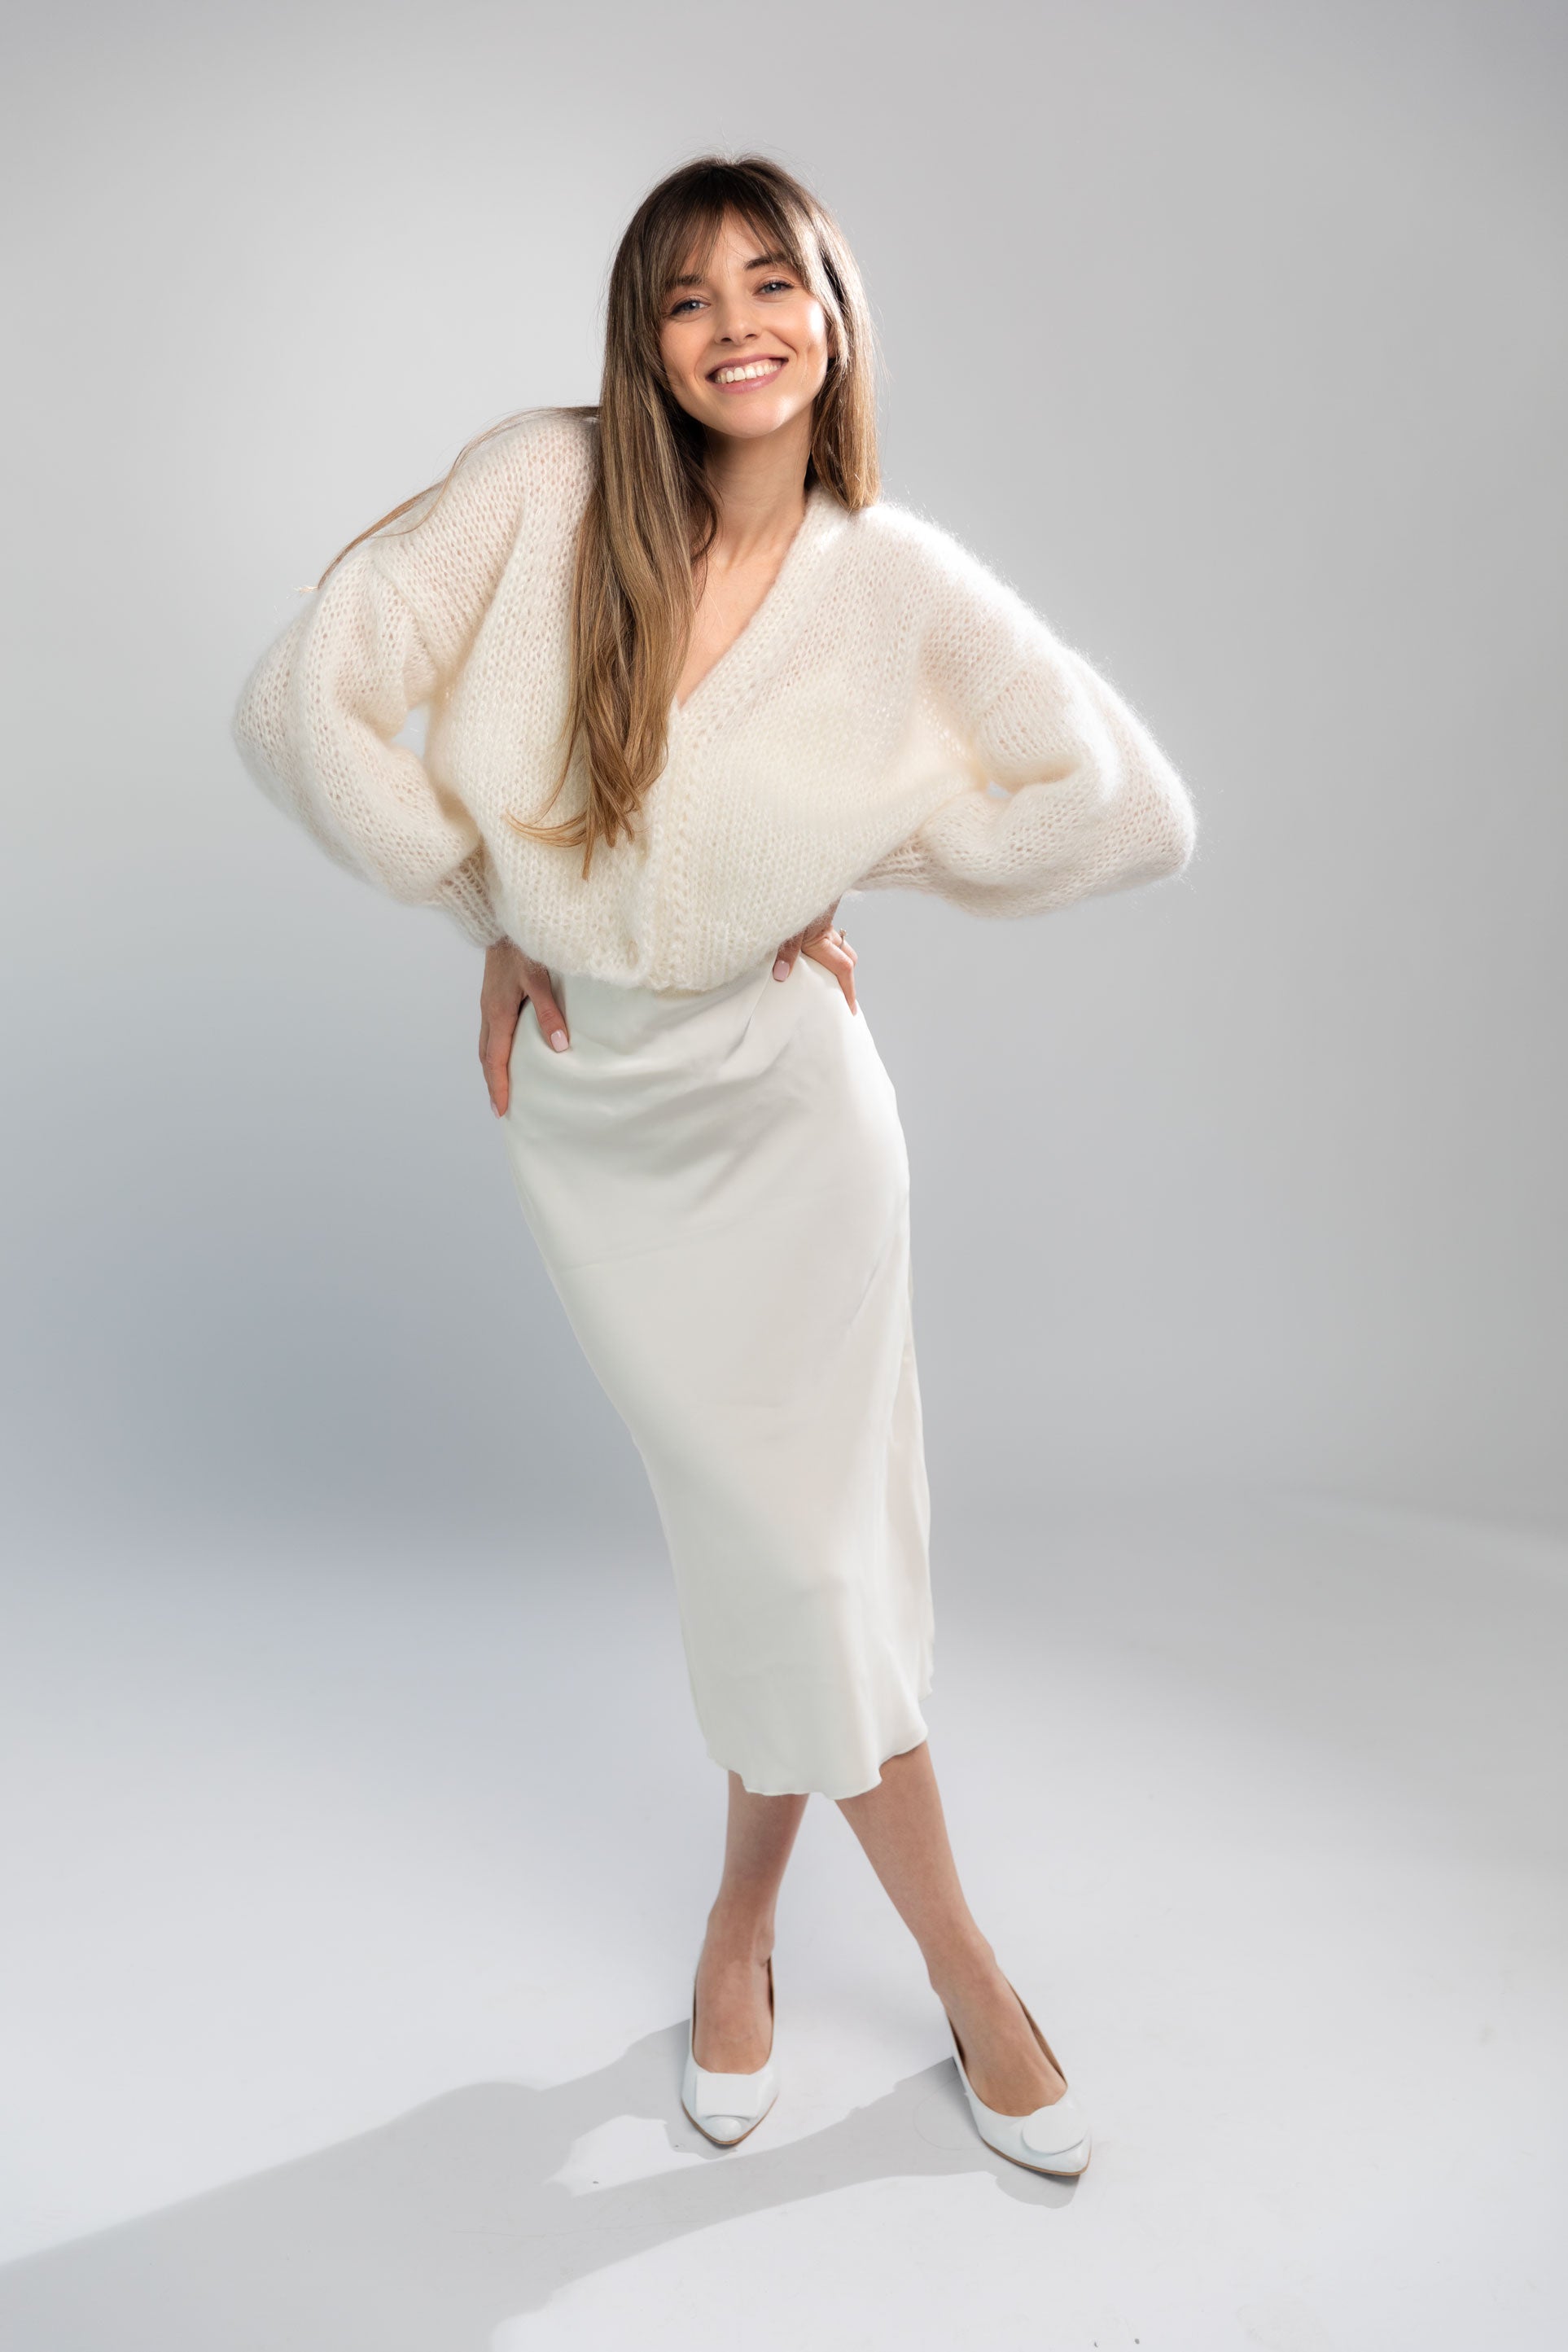 Handmade fluffy mohair cardigan, white color, with dropped shoulders and shell buttons. It has a voluminous and airy texture. Style it with high rise bottoms or a slip dress. Made from premium Italian yarn.